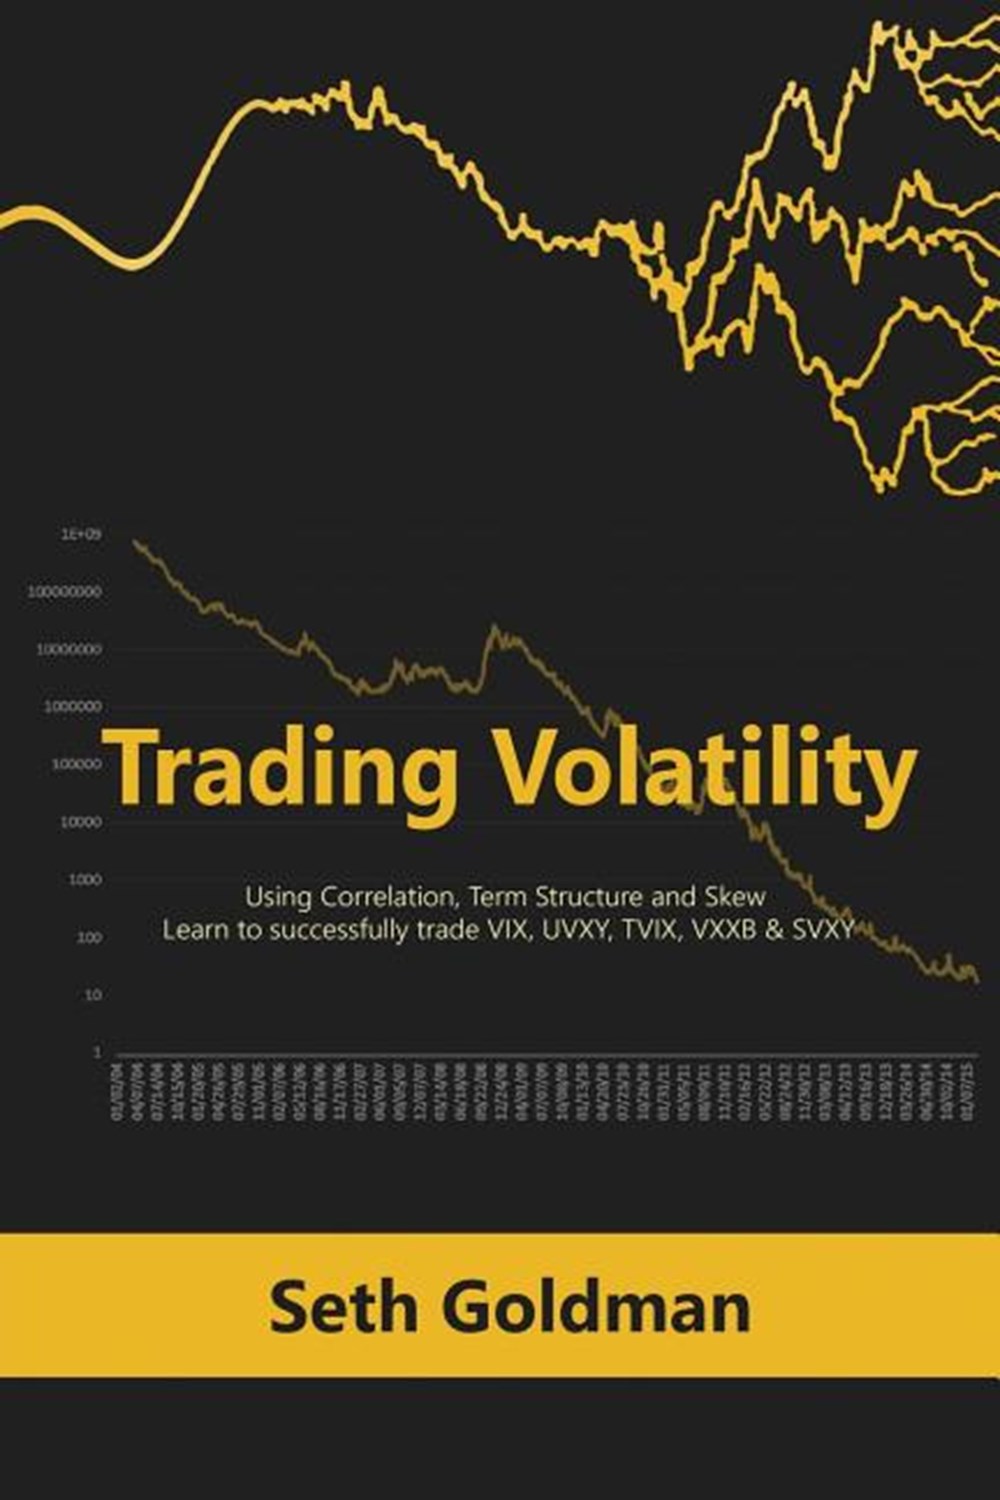 Trading Volatility Using Correlation, Term Structure and Skew: Learn to successfully trade VIX, UVXY